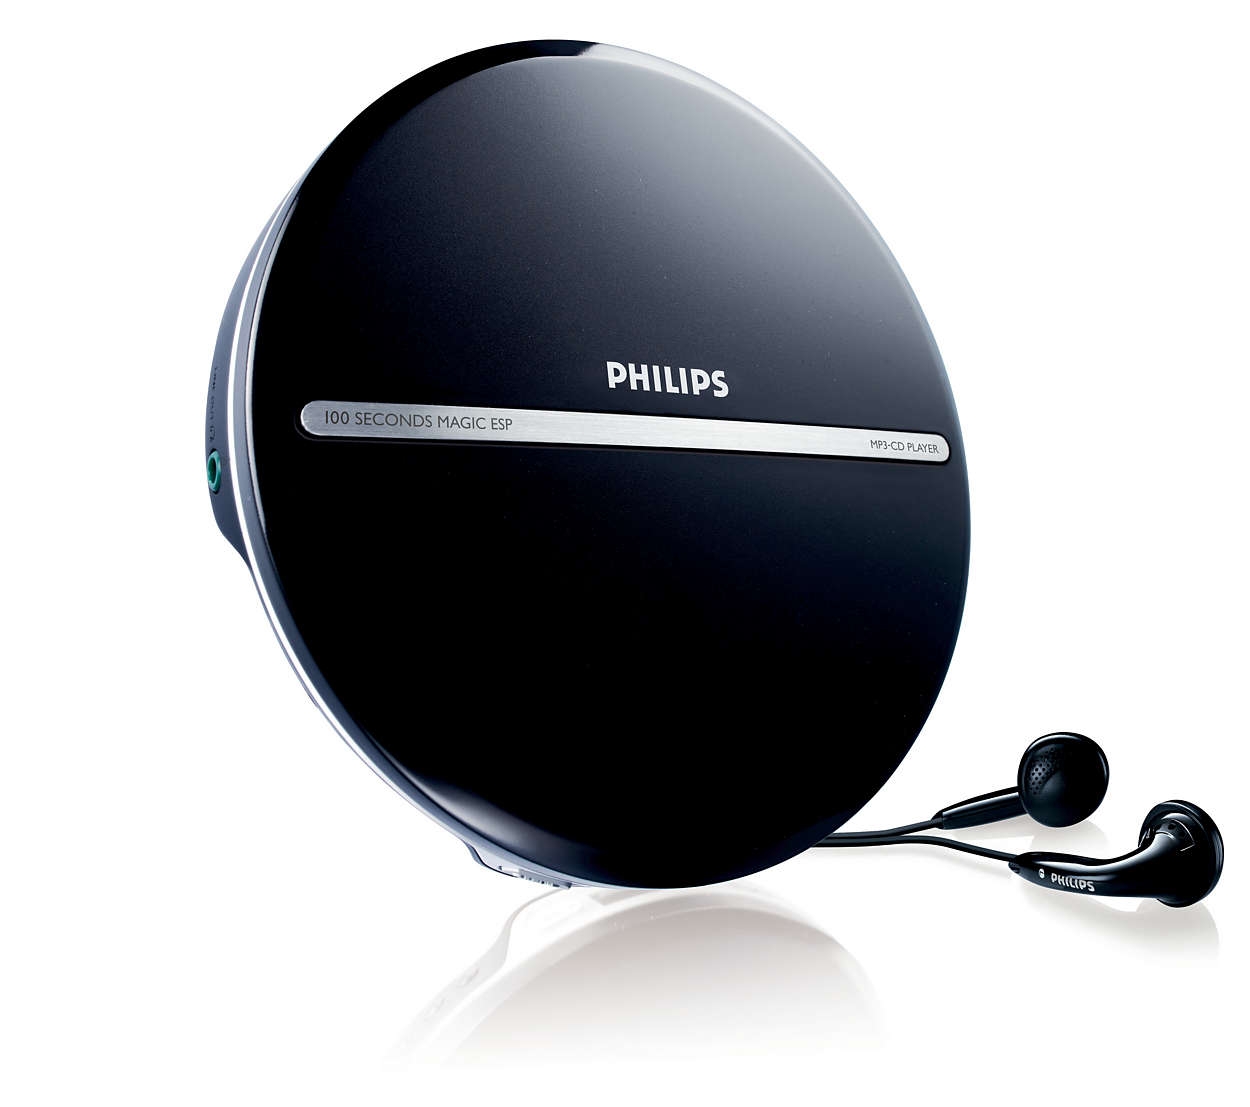 Philips Portable MP3 CD Player NEW Sealed EXP2546/17 100 Second Skip Protection